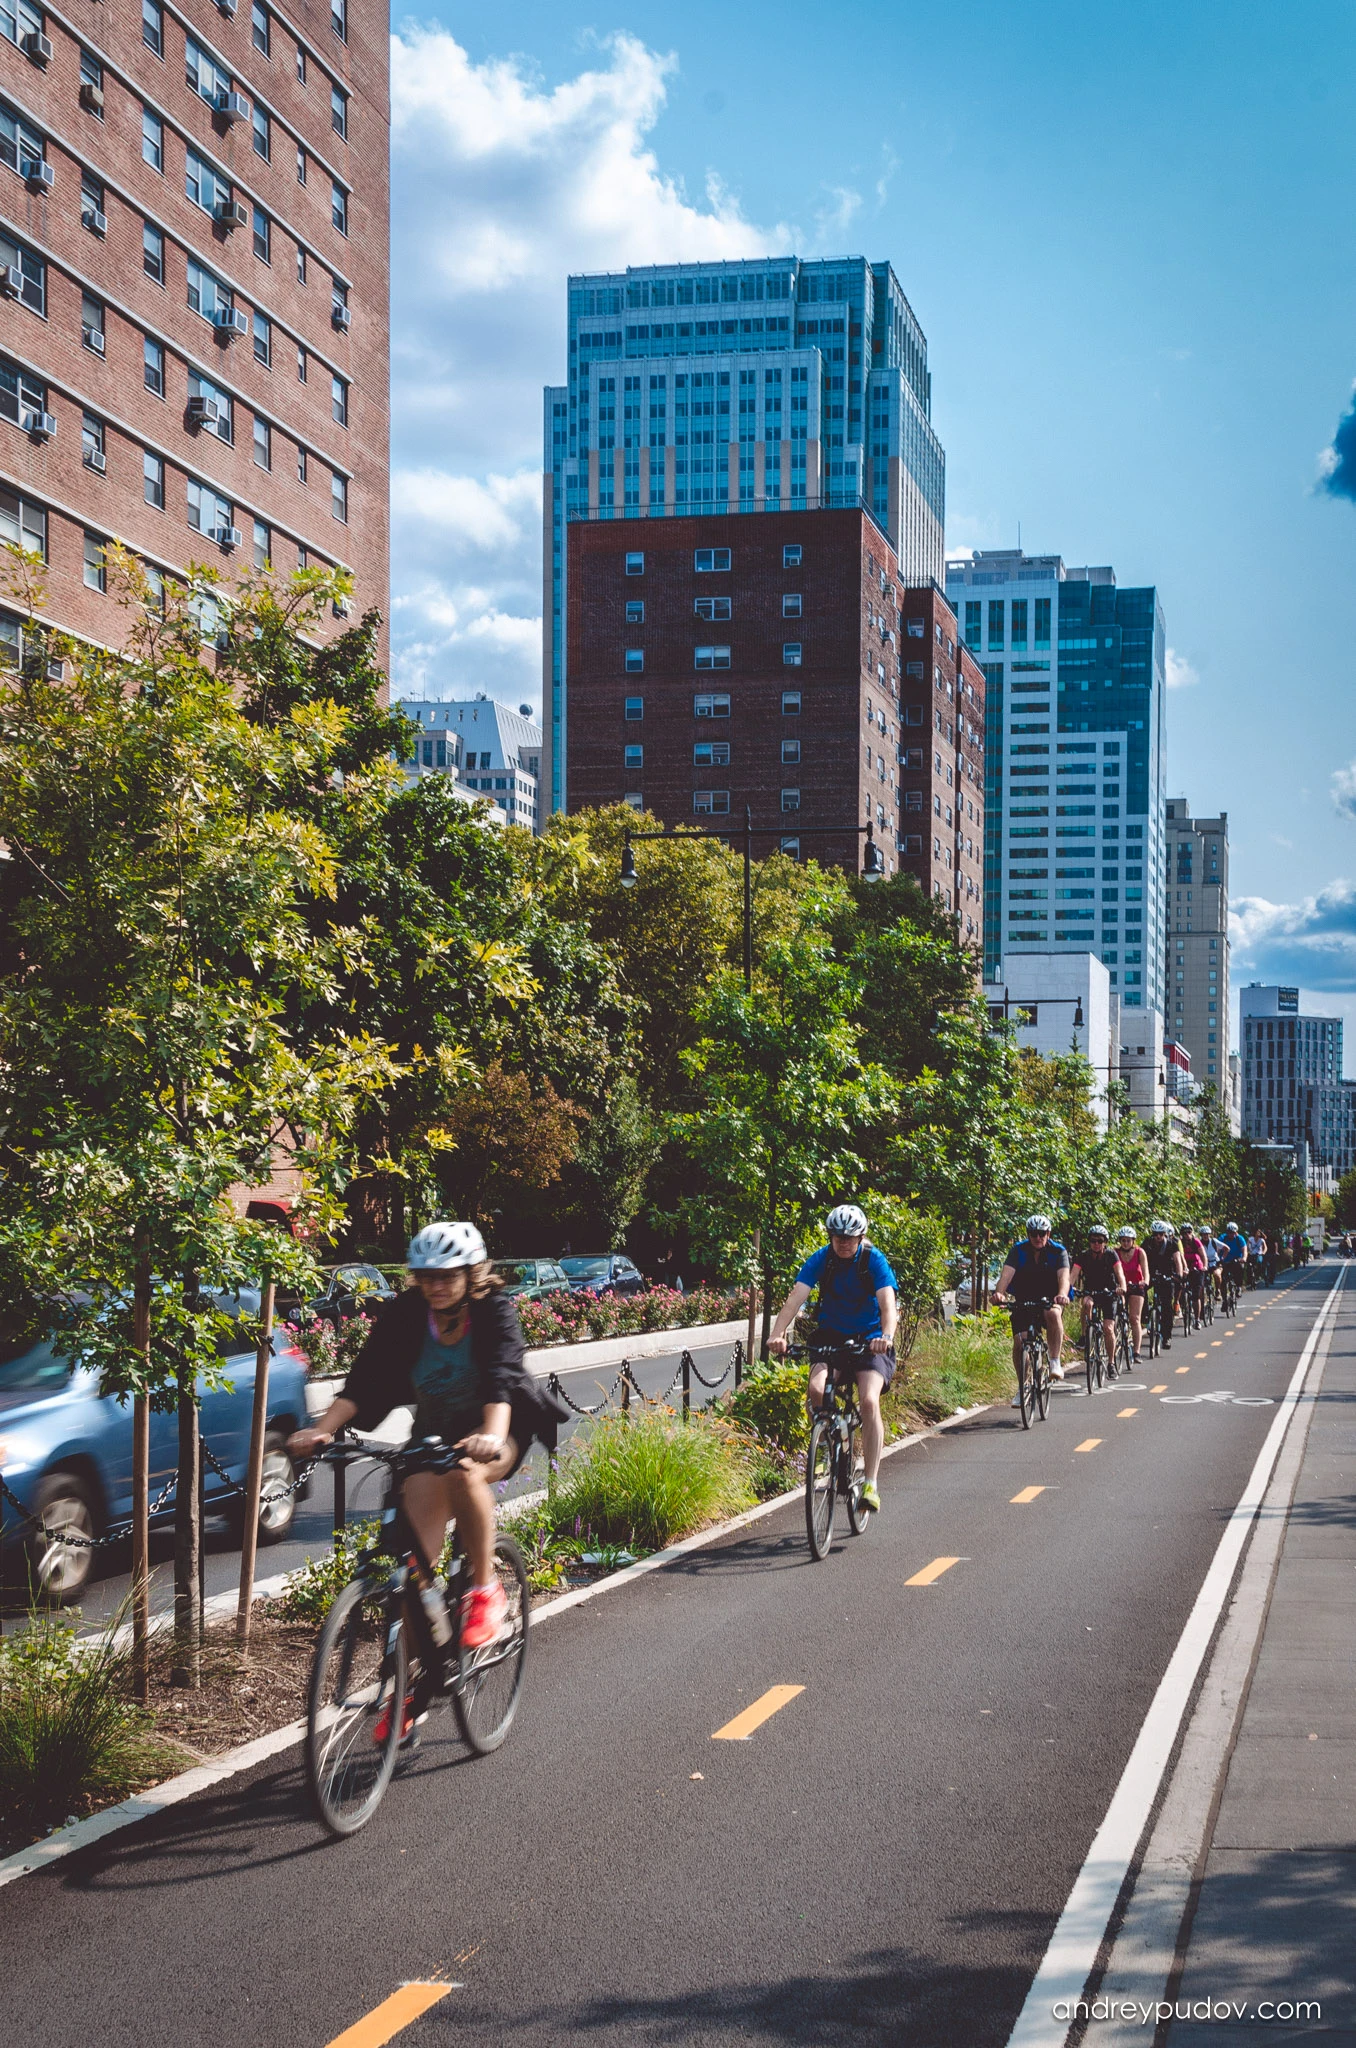 Conquering America 2.0 - Cycling in New York City

Approximately eight hundred thousand New Yorkers ride a bike regularly. It is estimated that over 530,000 cycling trips are made each day in New York City.